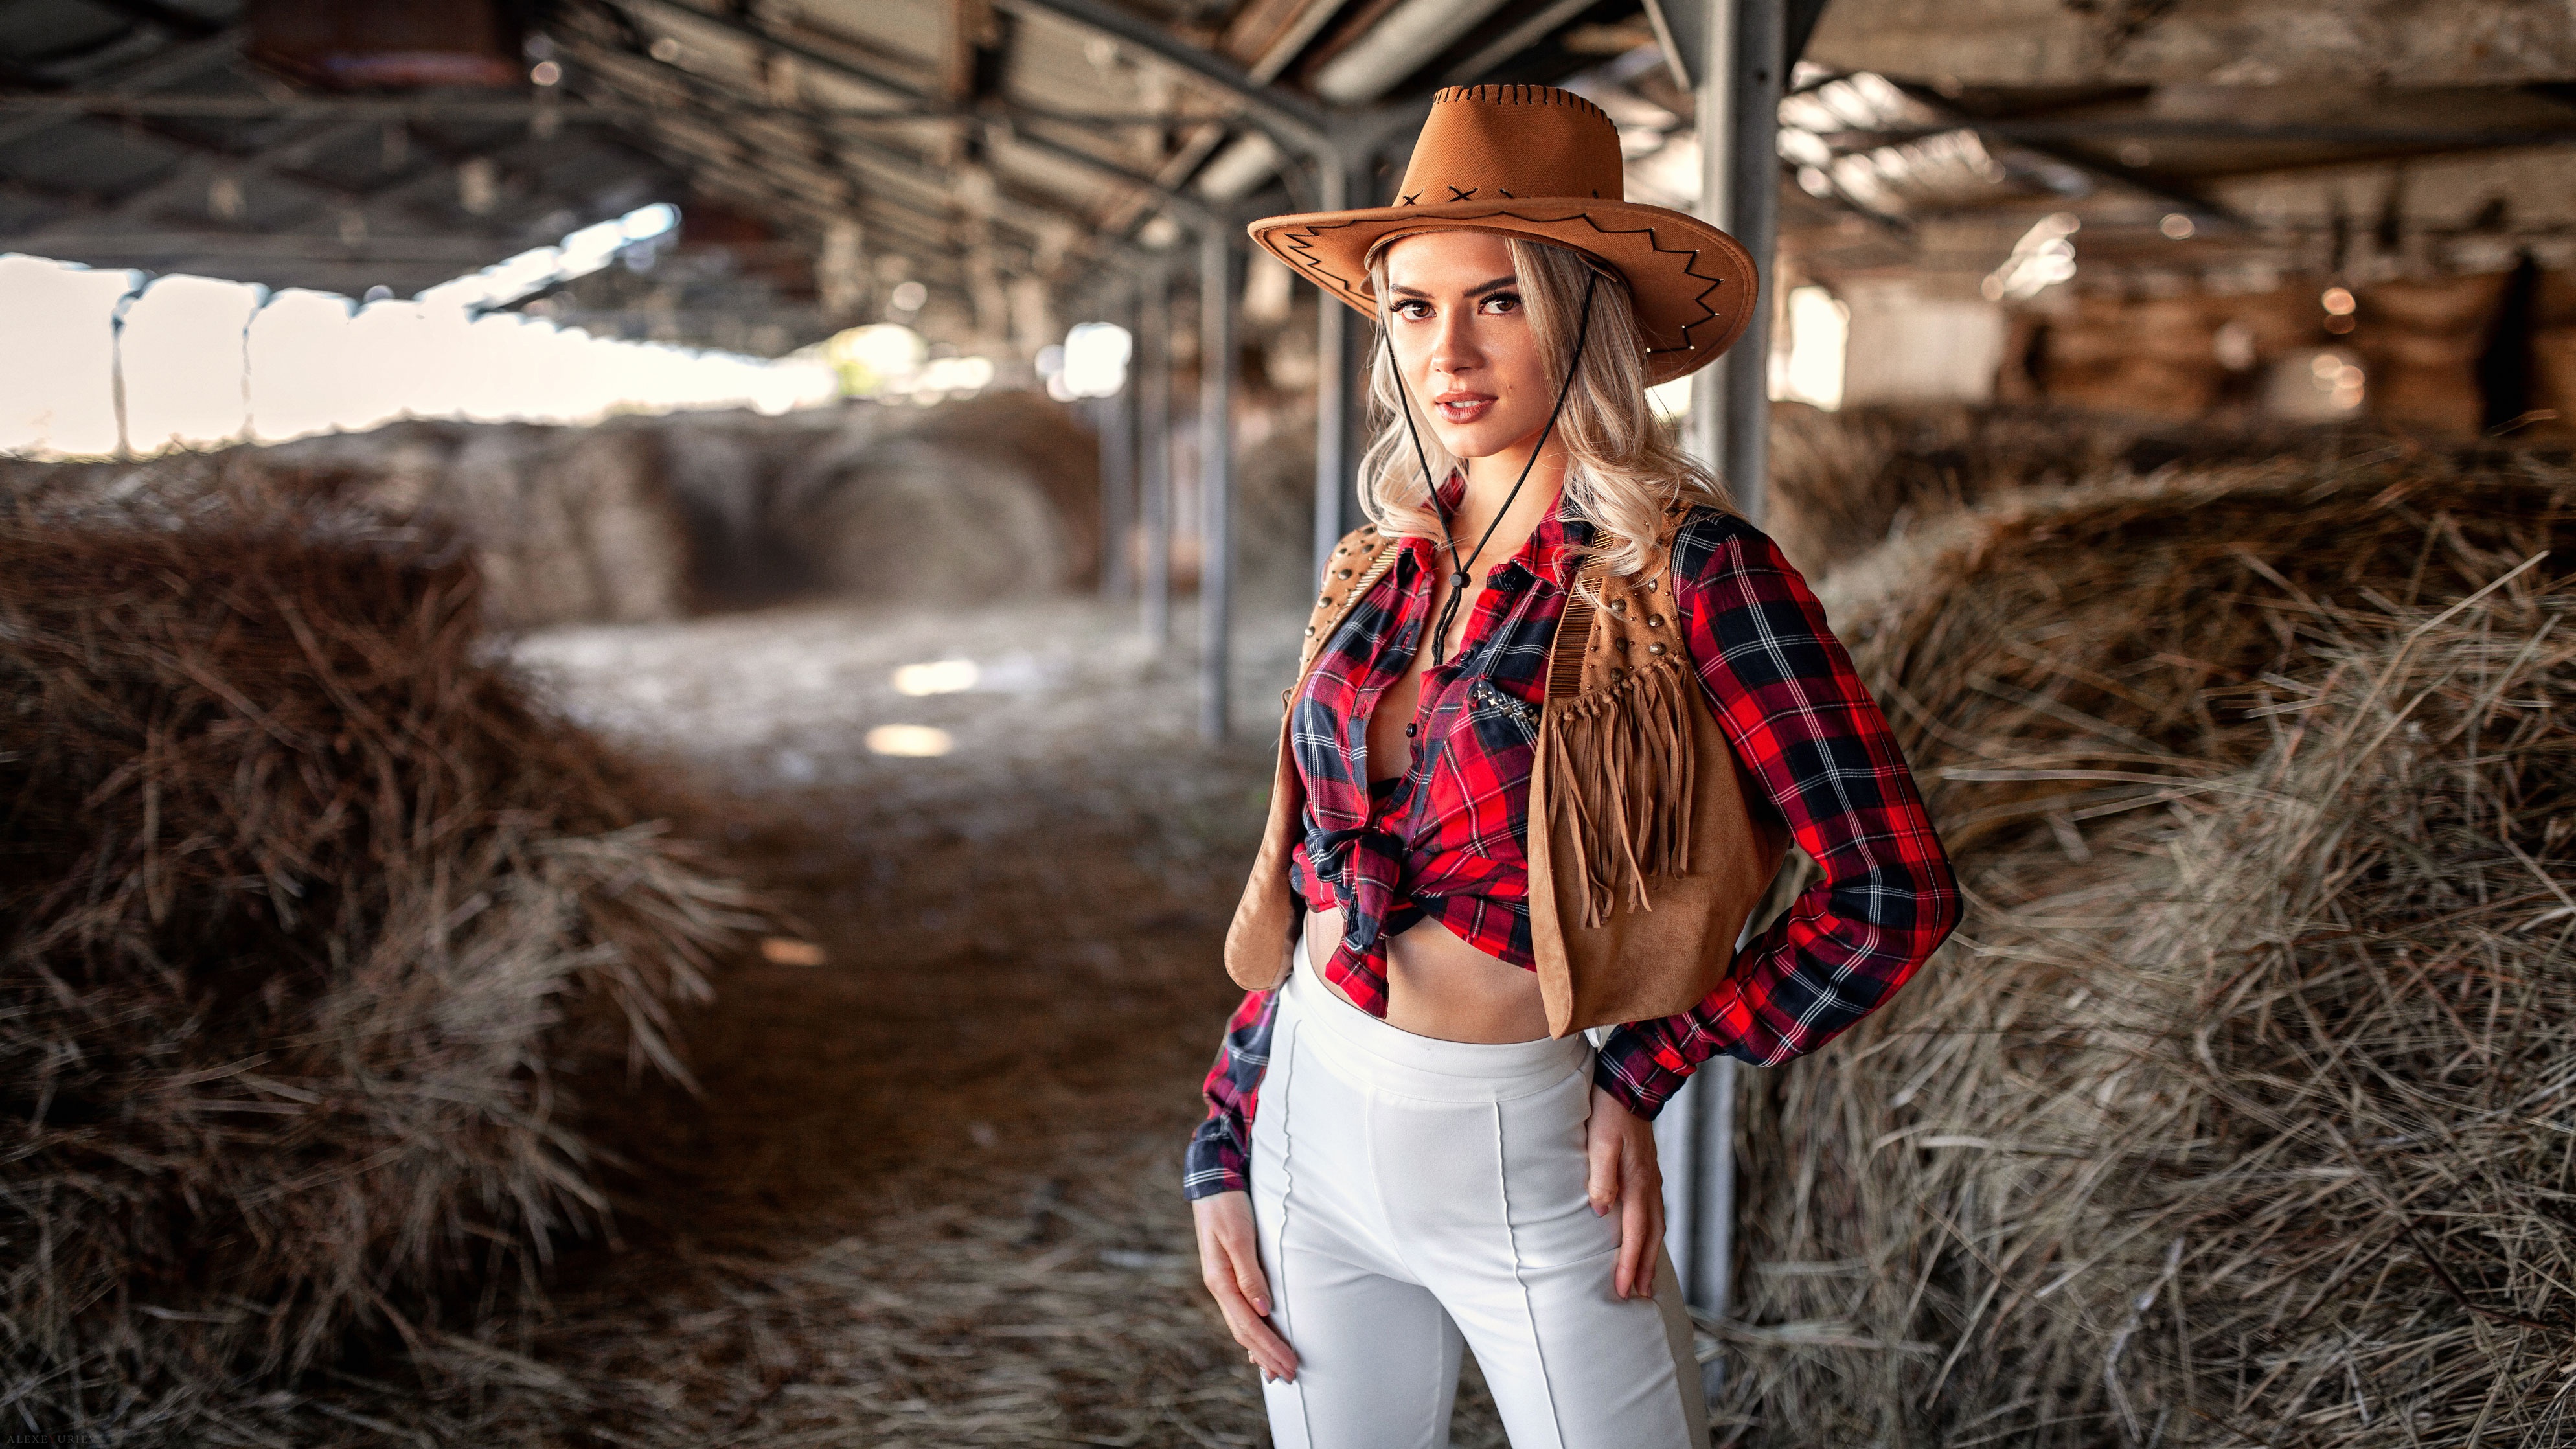 Women Model Straw Hat Blonde Standing White Pants Plaid Shirt Women With Hats Cowgirl Cow Girl 3977x2237